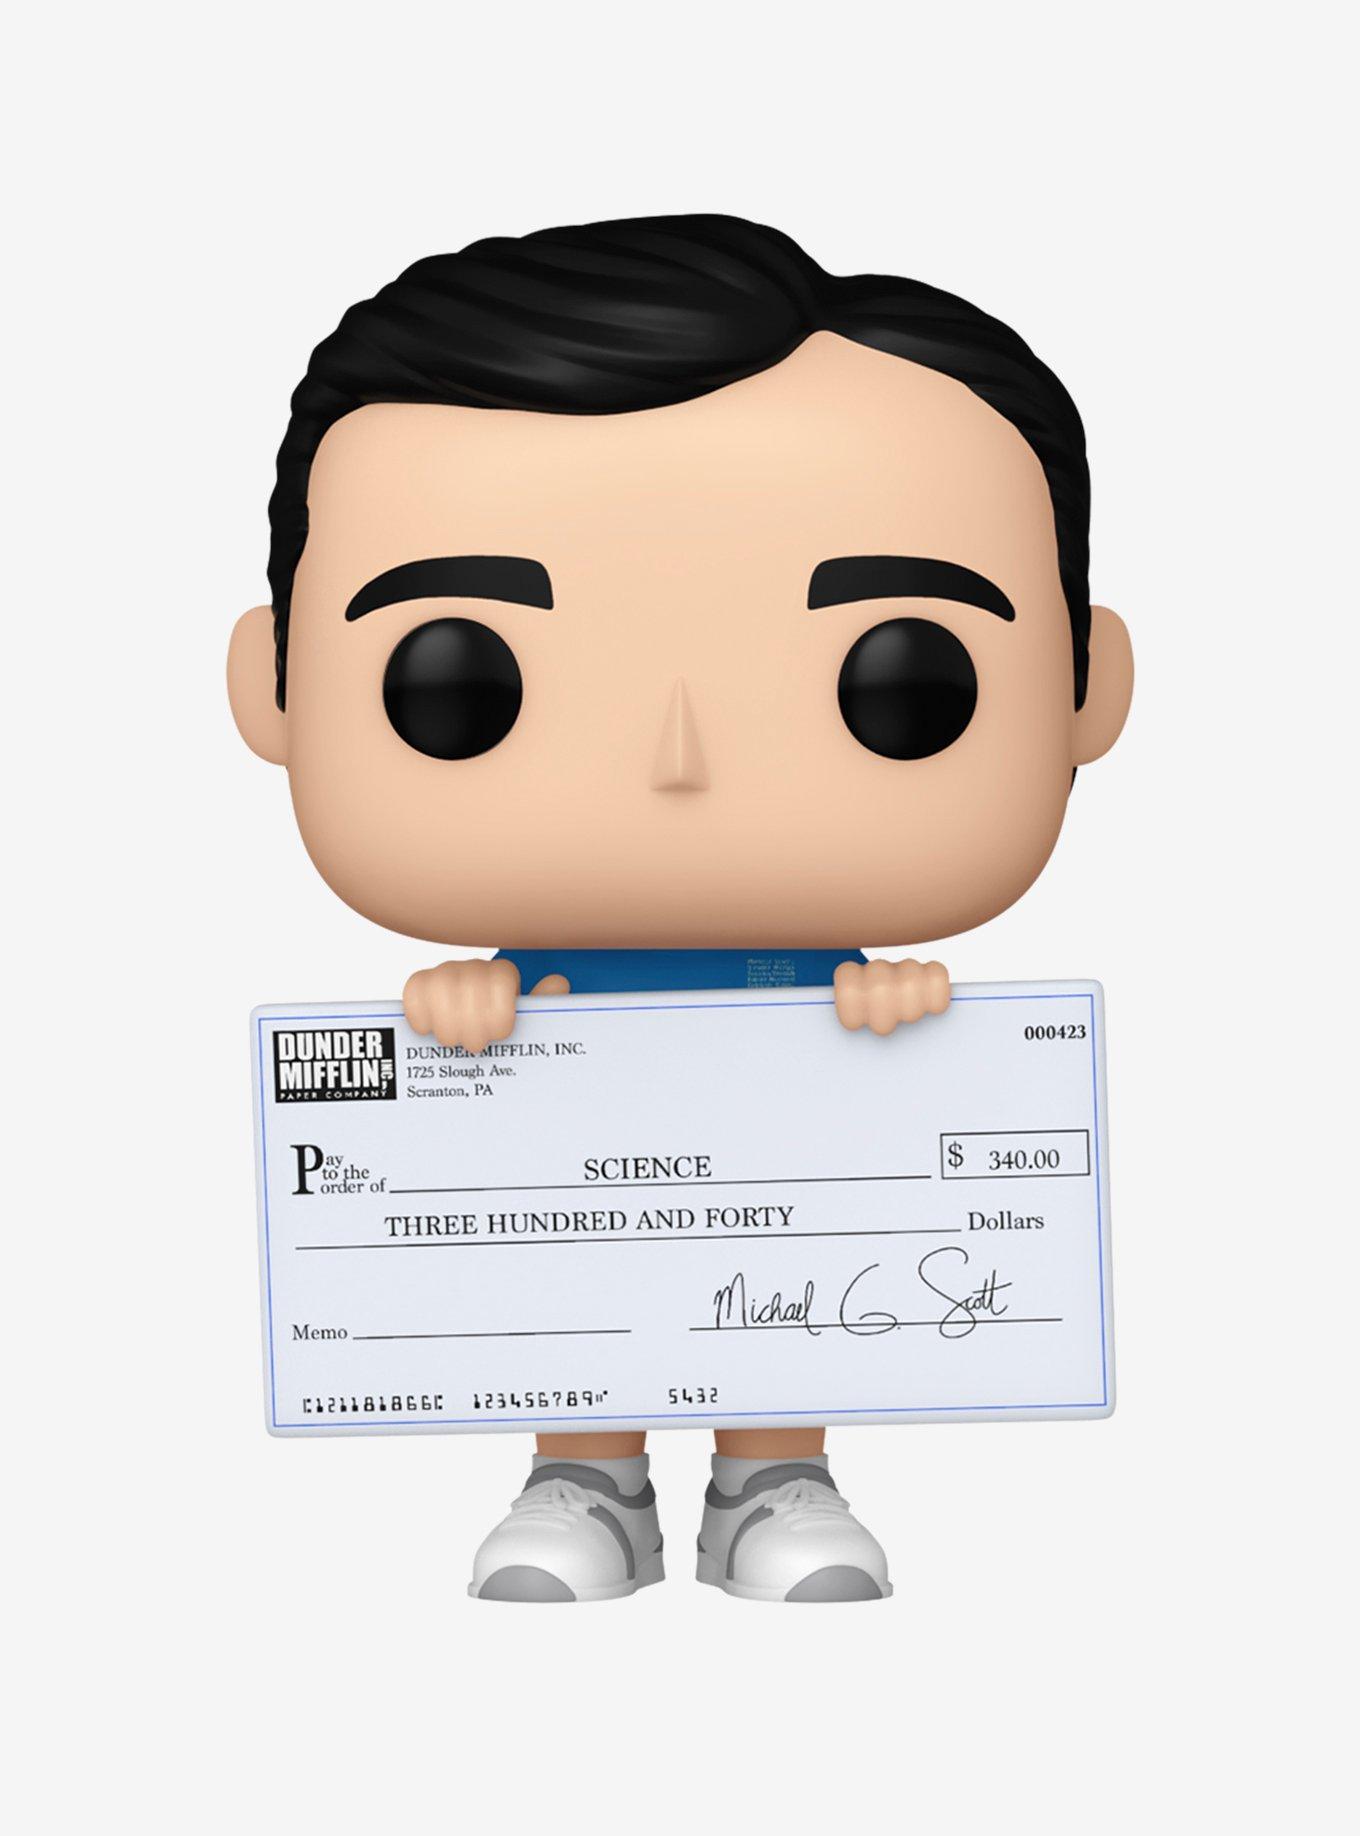 Funko The Office Pop! Television Michael With Check Vinyl Figure, , hi-res